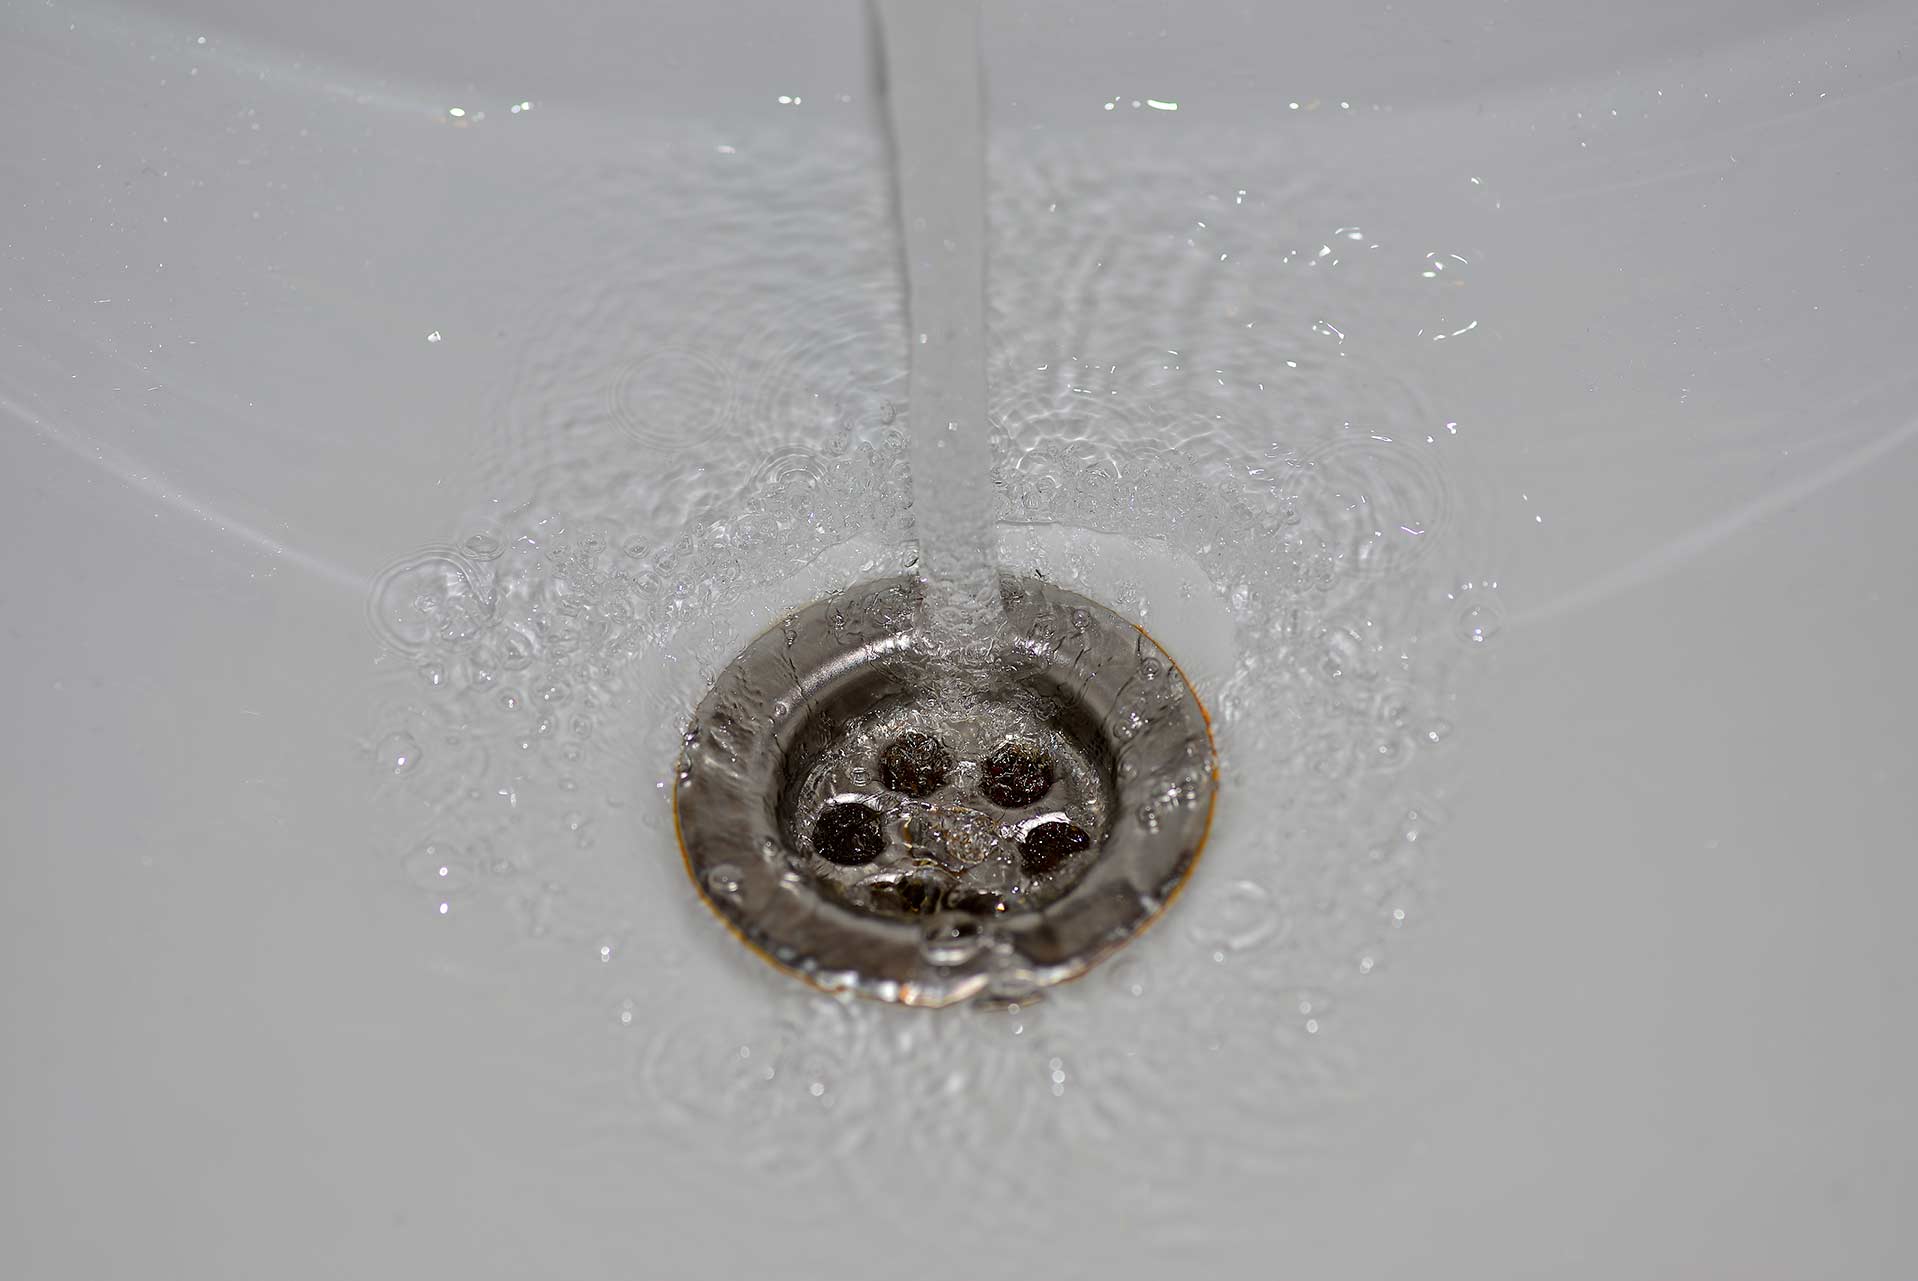 A2B Drains provides services to unblock blocked sinks and drains for properties in Solihull.